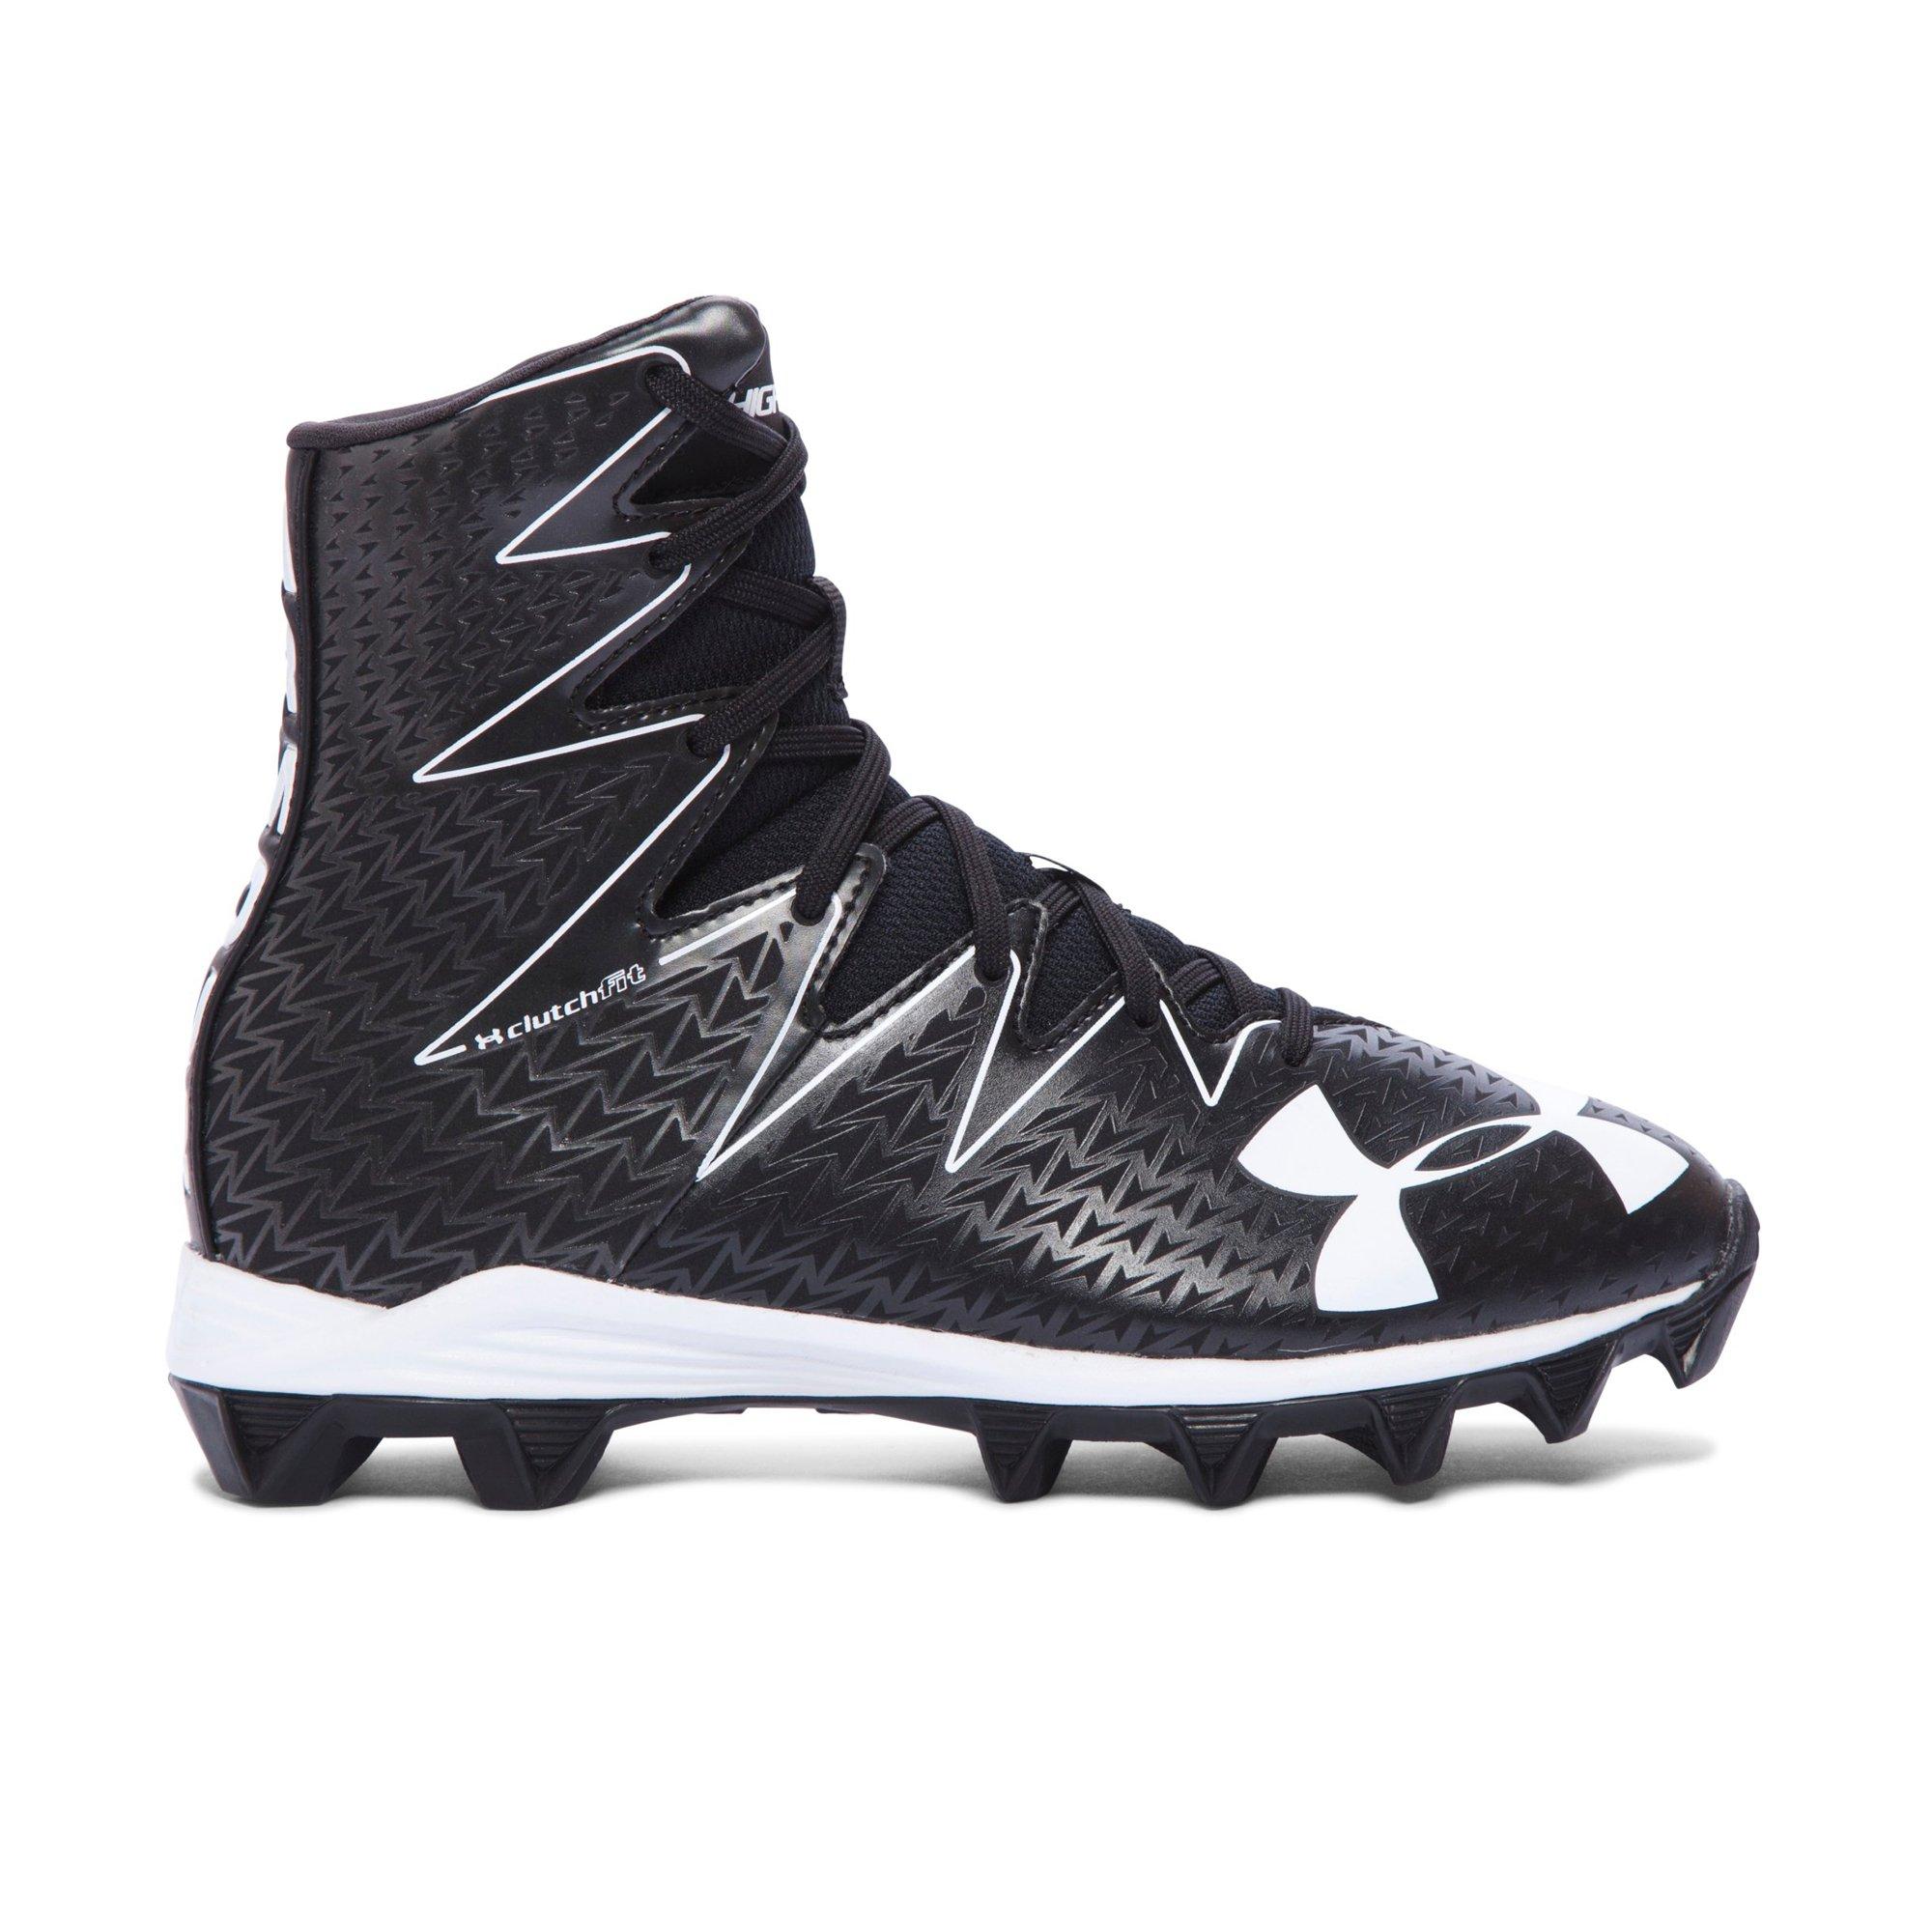 ua highlight cleats youth